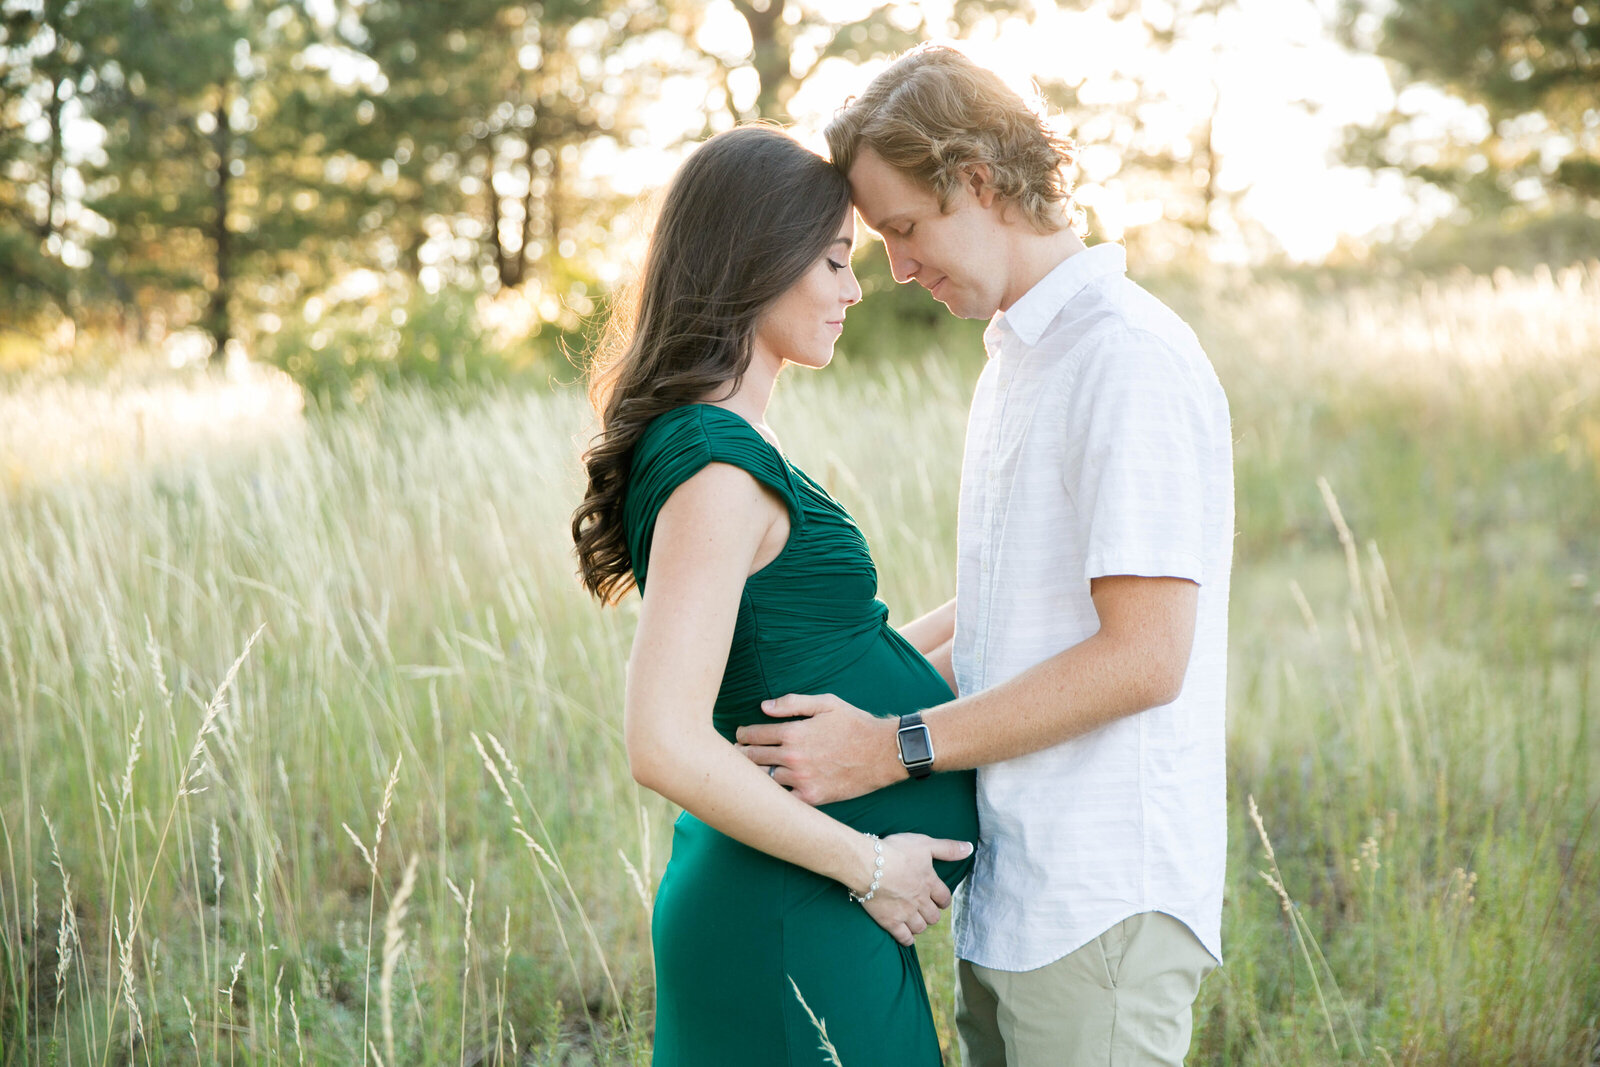 Karlie Colleen Photography - Flagstaff Maternity photography - Danny & Taylor (185 of 240)